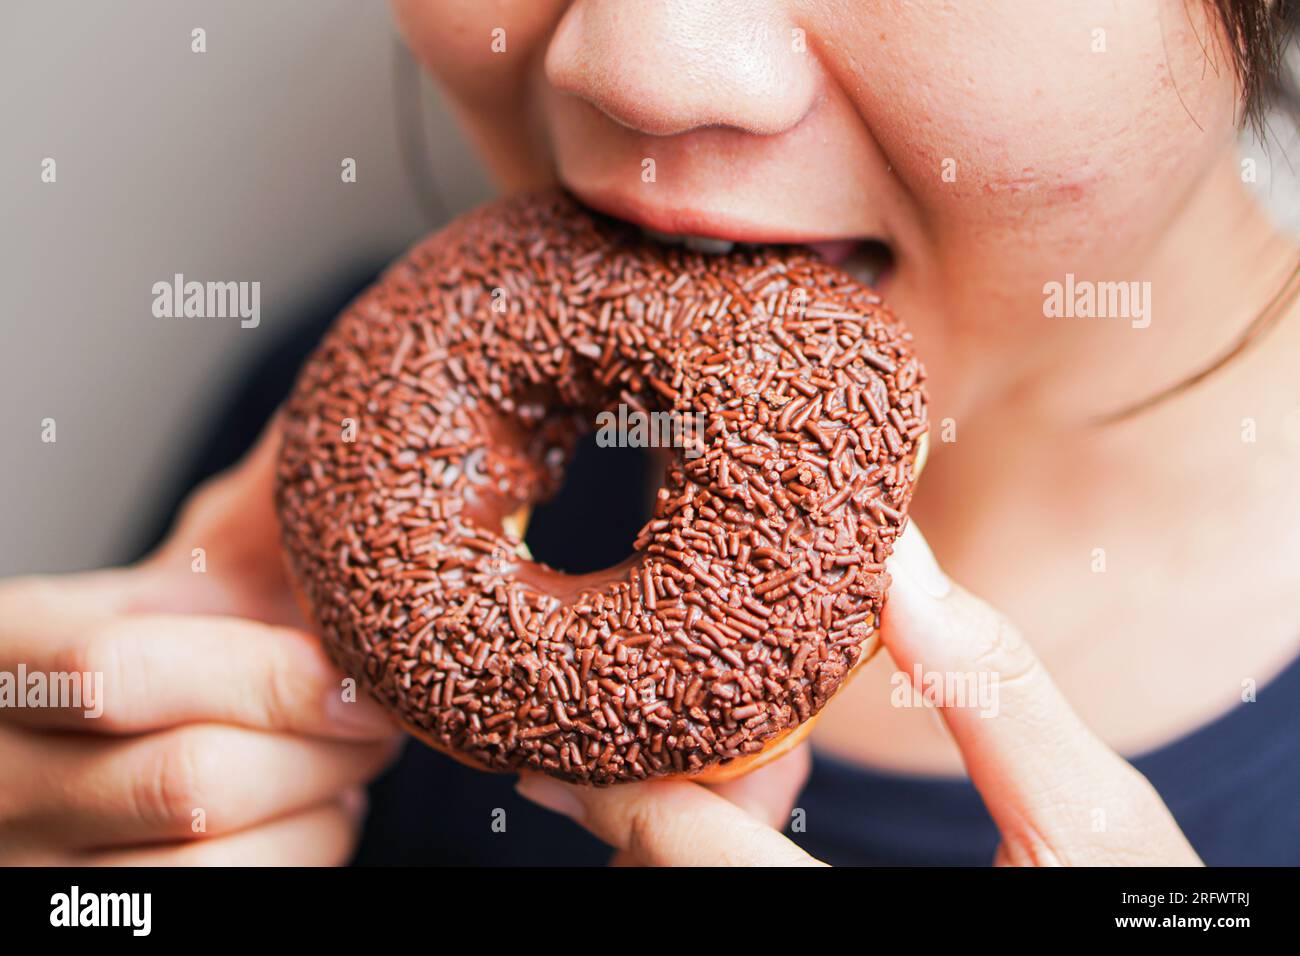 young women eating tasty chocolate donut Stock Photo